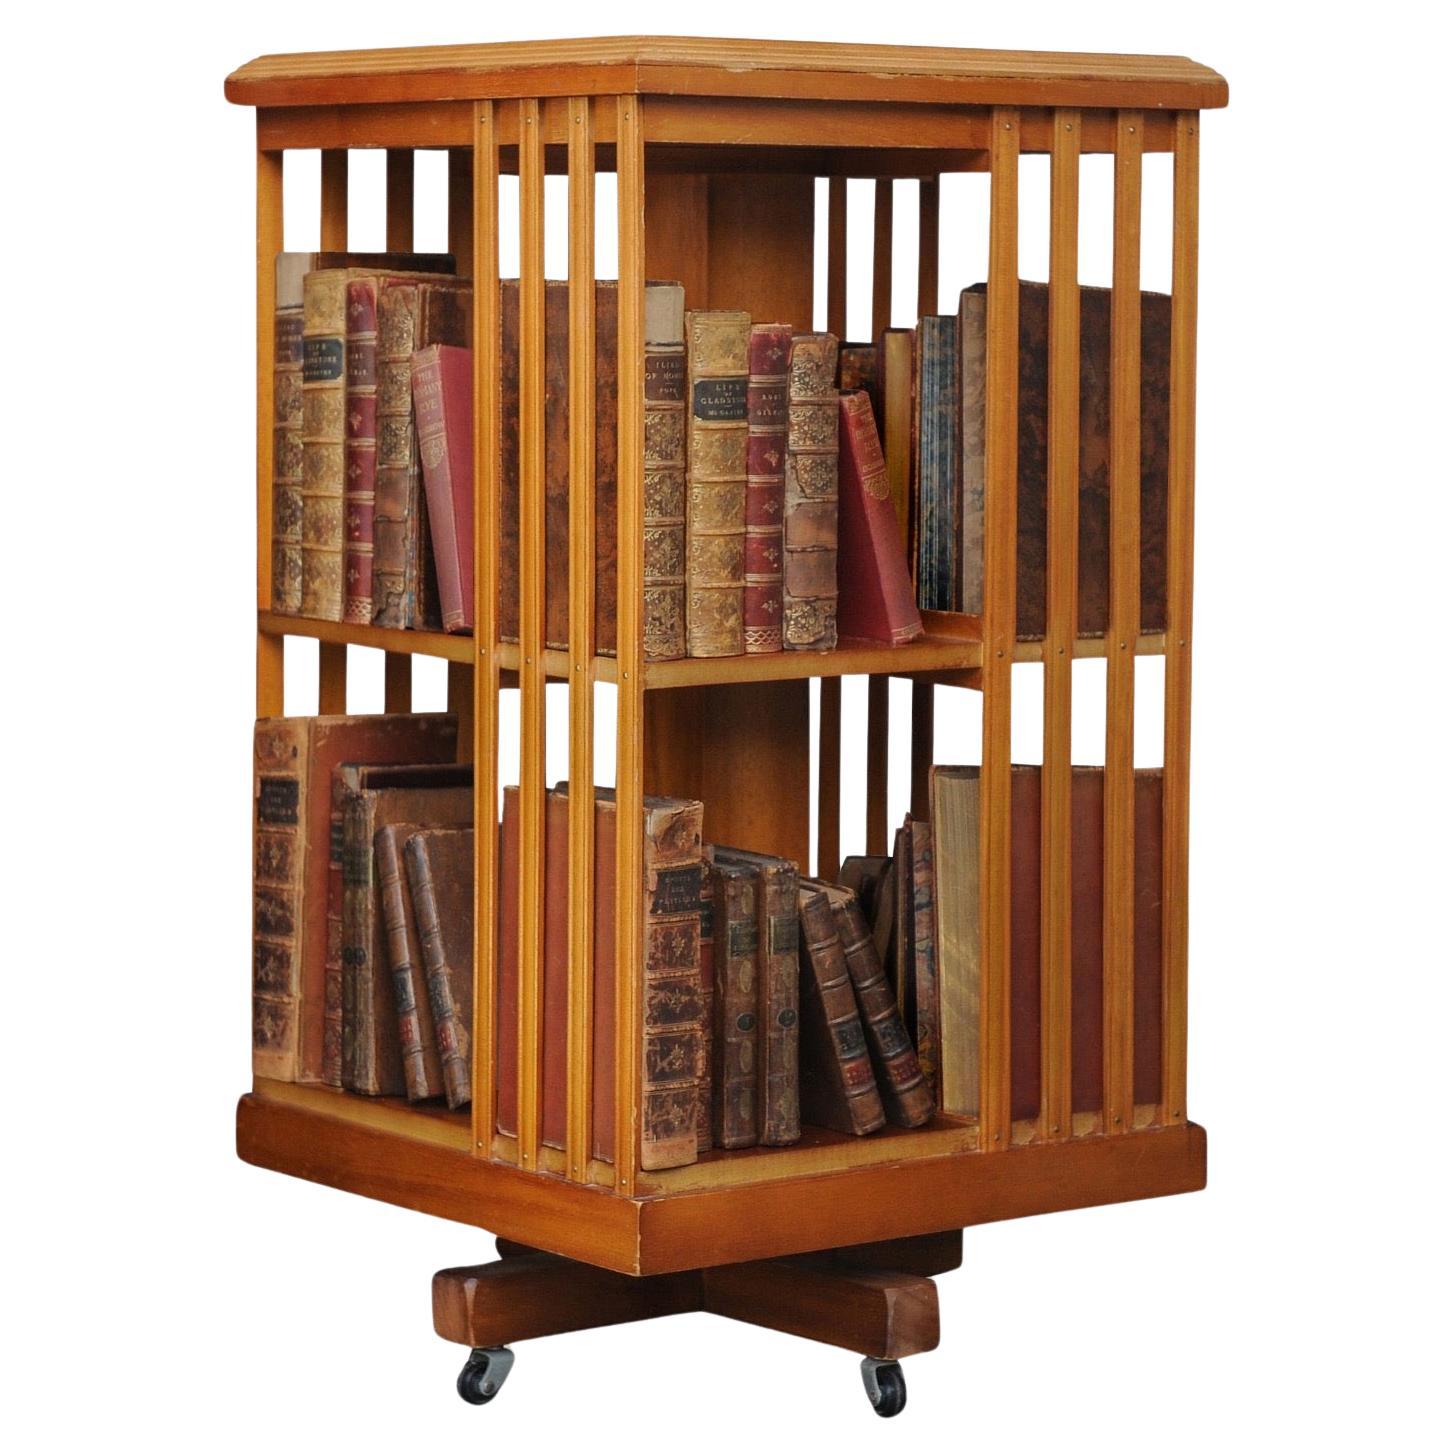 Regency Revival Revolving Sectional Two Tier Library Bookcase on Castors For Sale